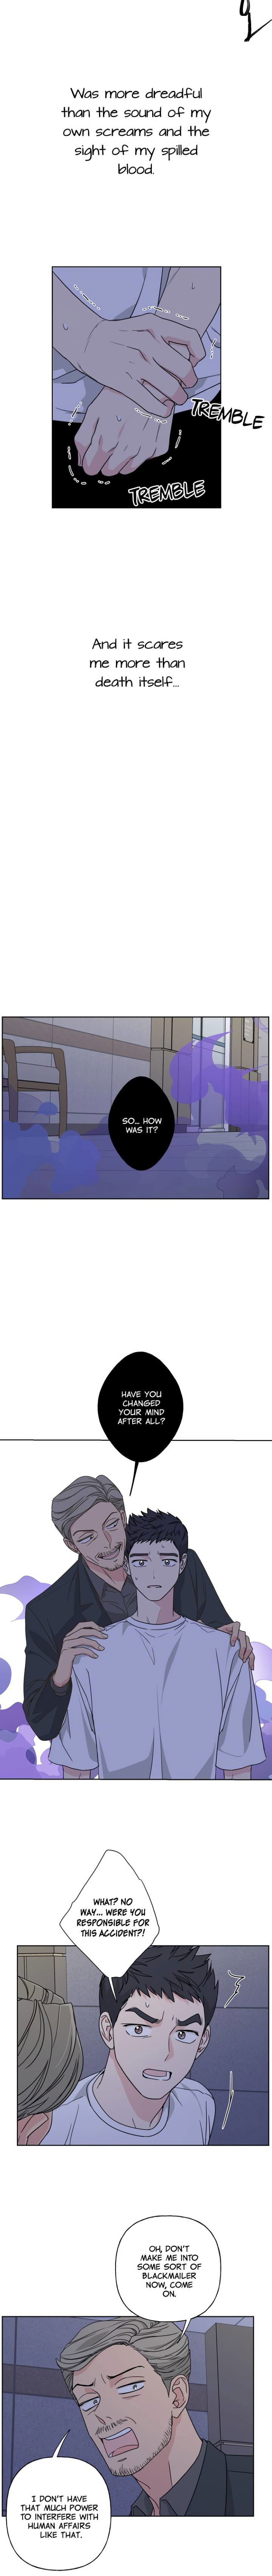 mother-im-sorry-chap-28-6